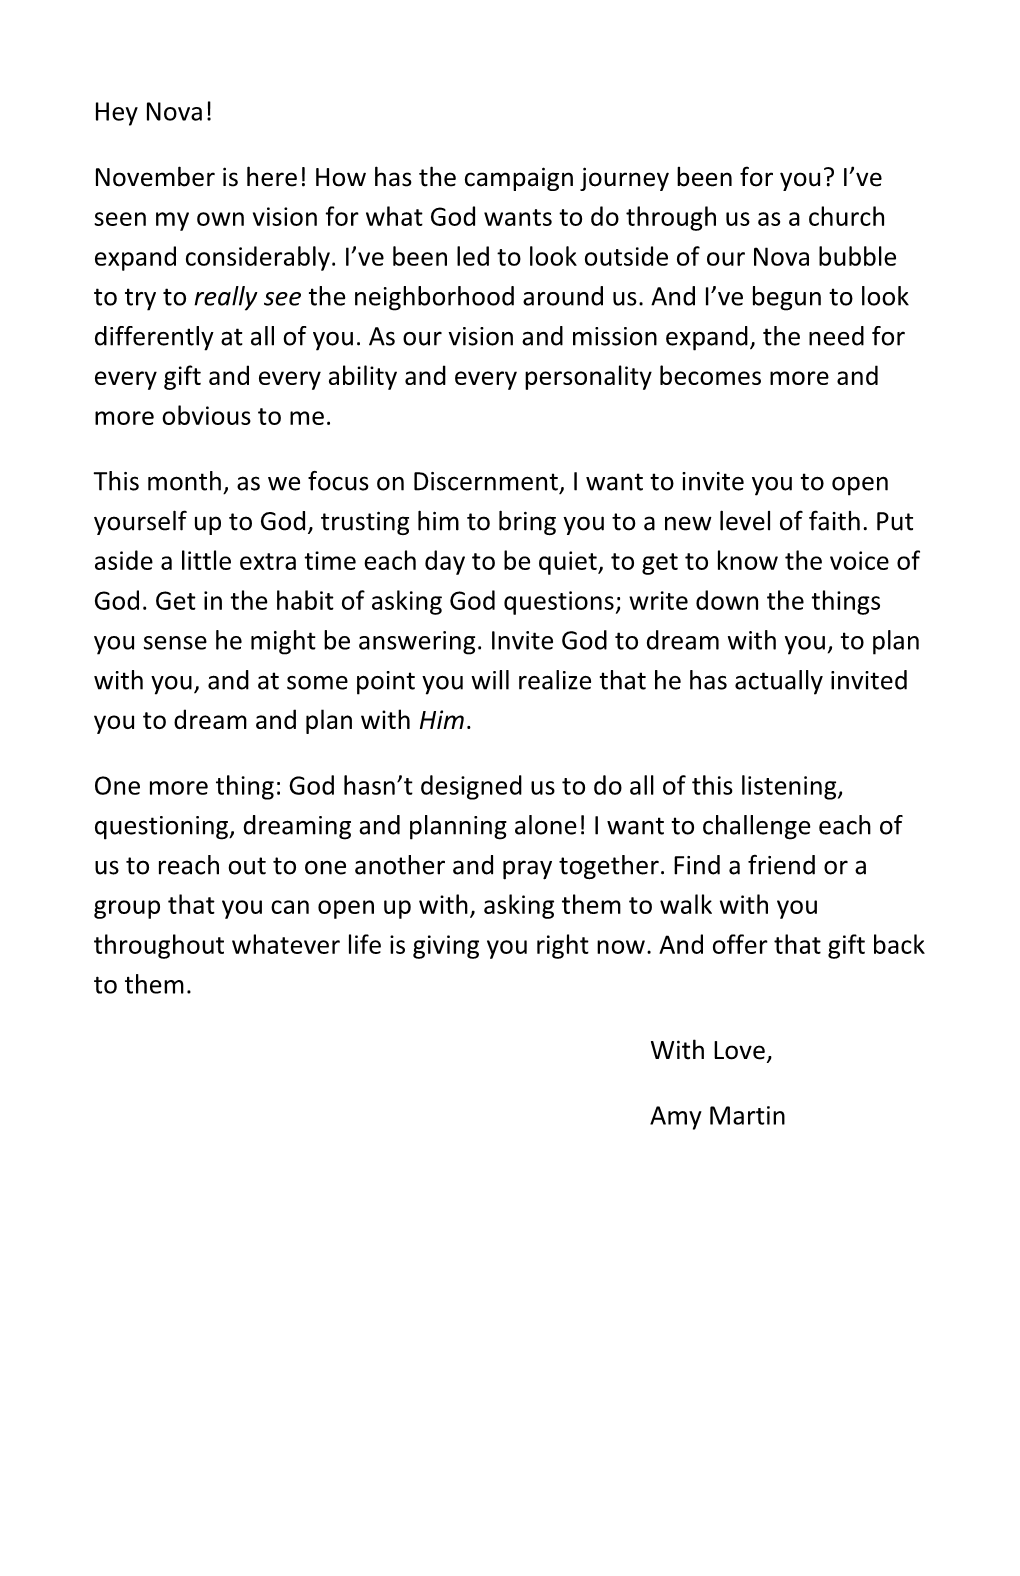 This Month, As We Focus on Discernment, I Want to Invite You to Open Yourself up to God